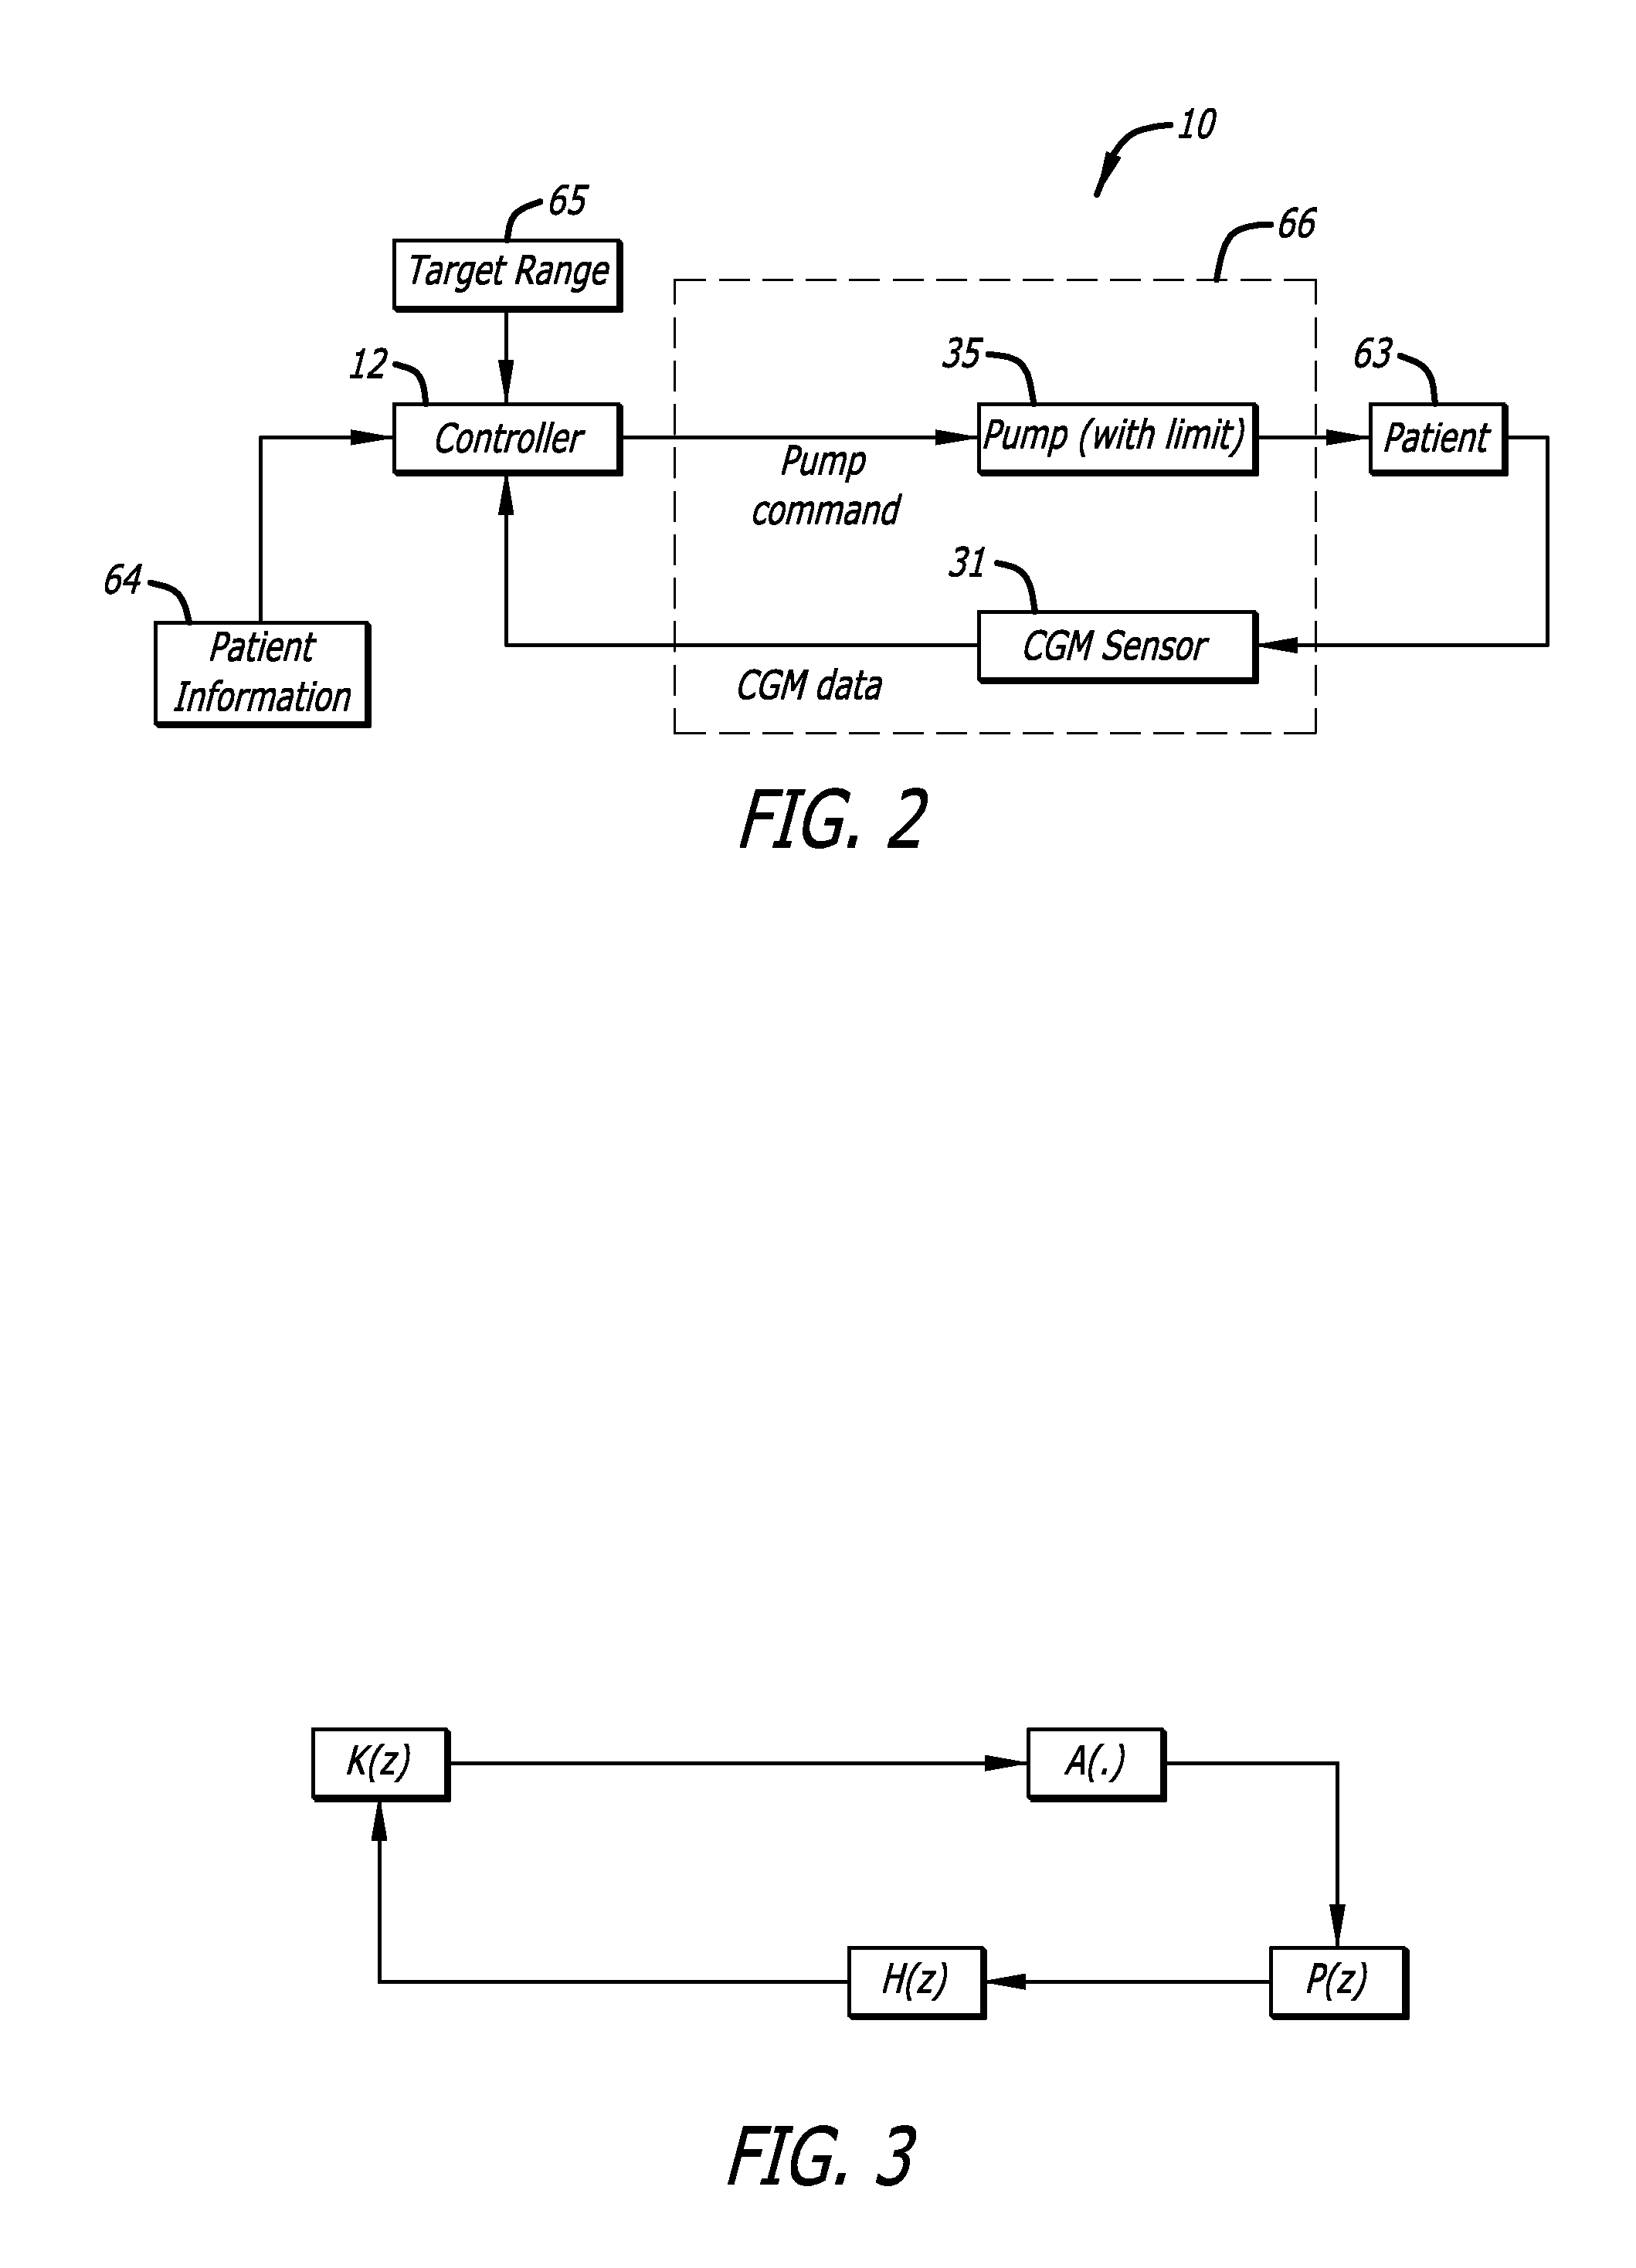 Safety layer for integrated insulin delivery system